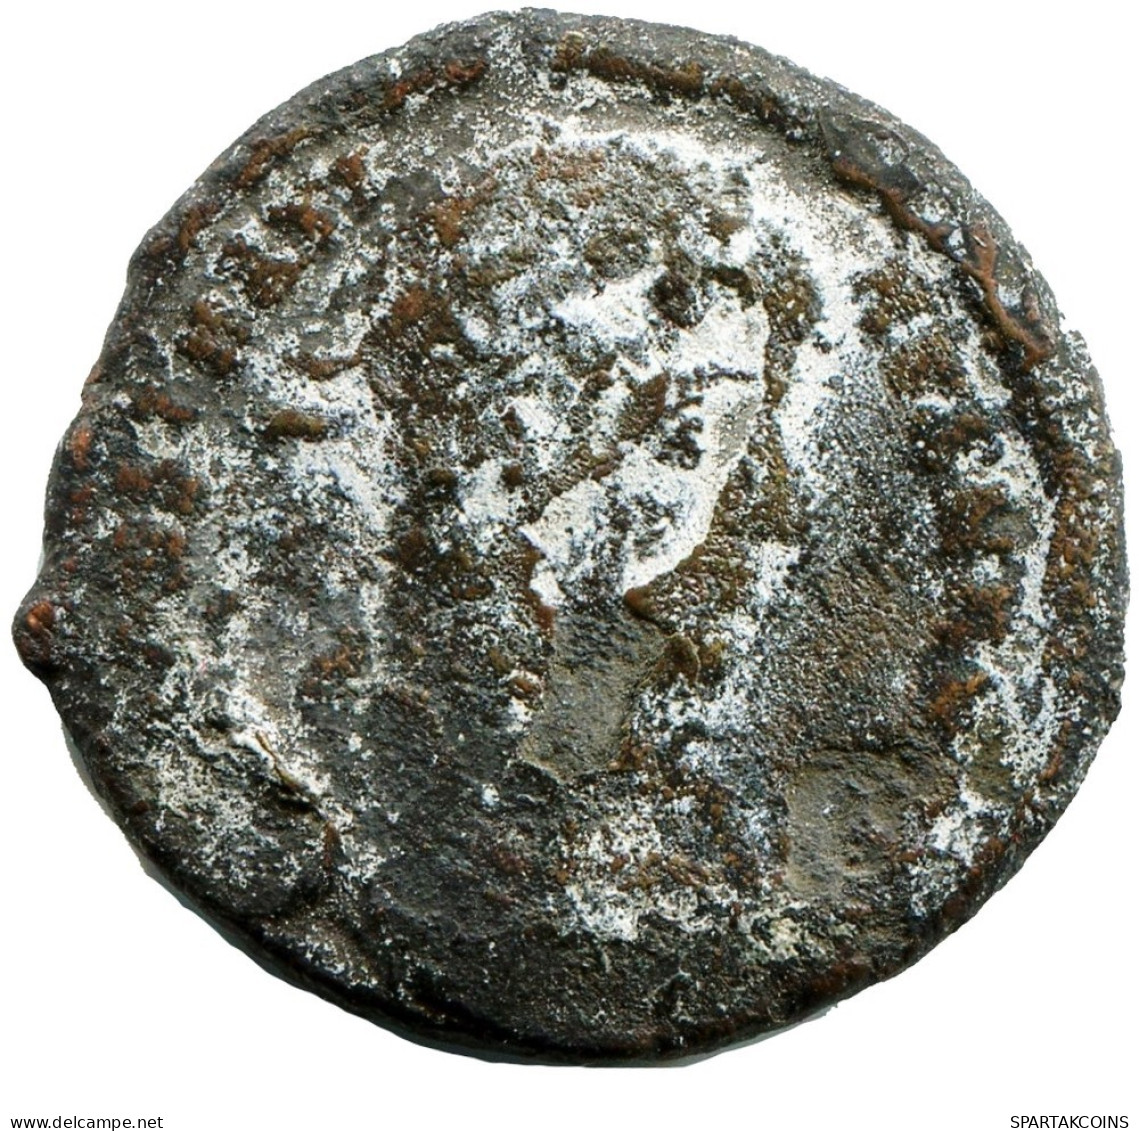 CONSTANTINE I MINTED IN CYZICUS FOUND IN IHNASYAH HOARD EGYPT #ANC10979.14.E.A - El Impero Christiano (307 / 363)